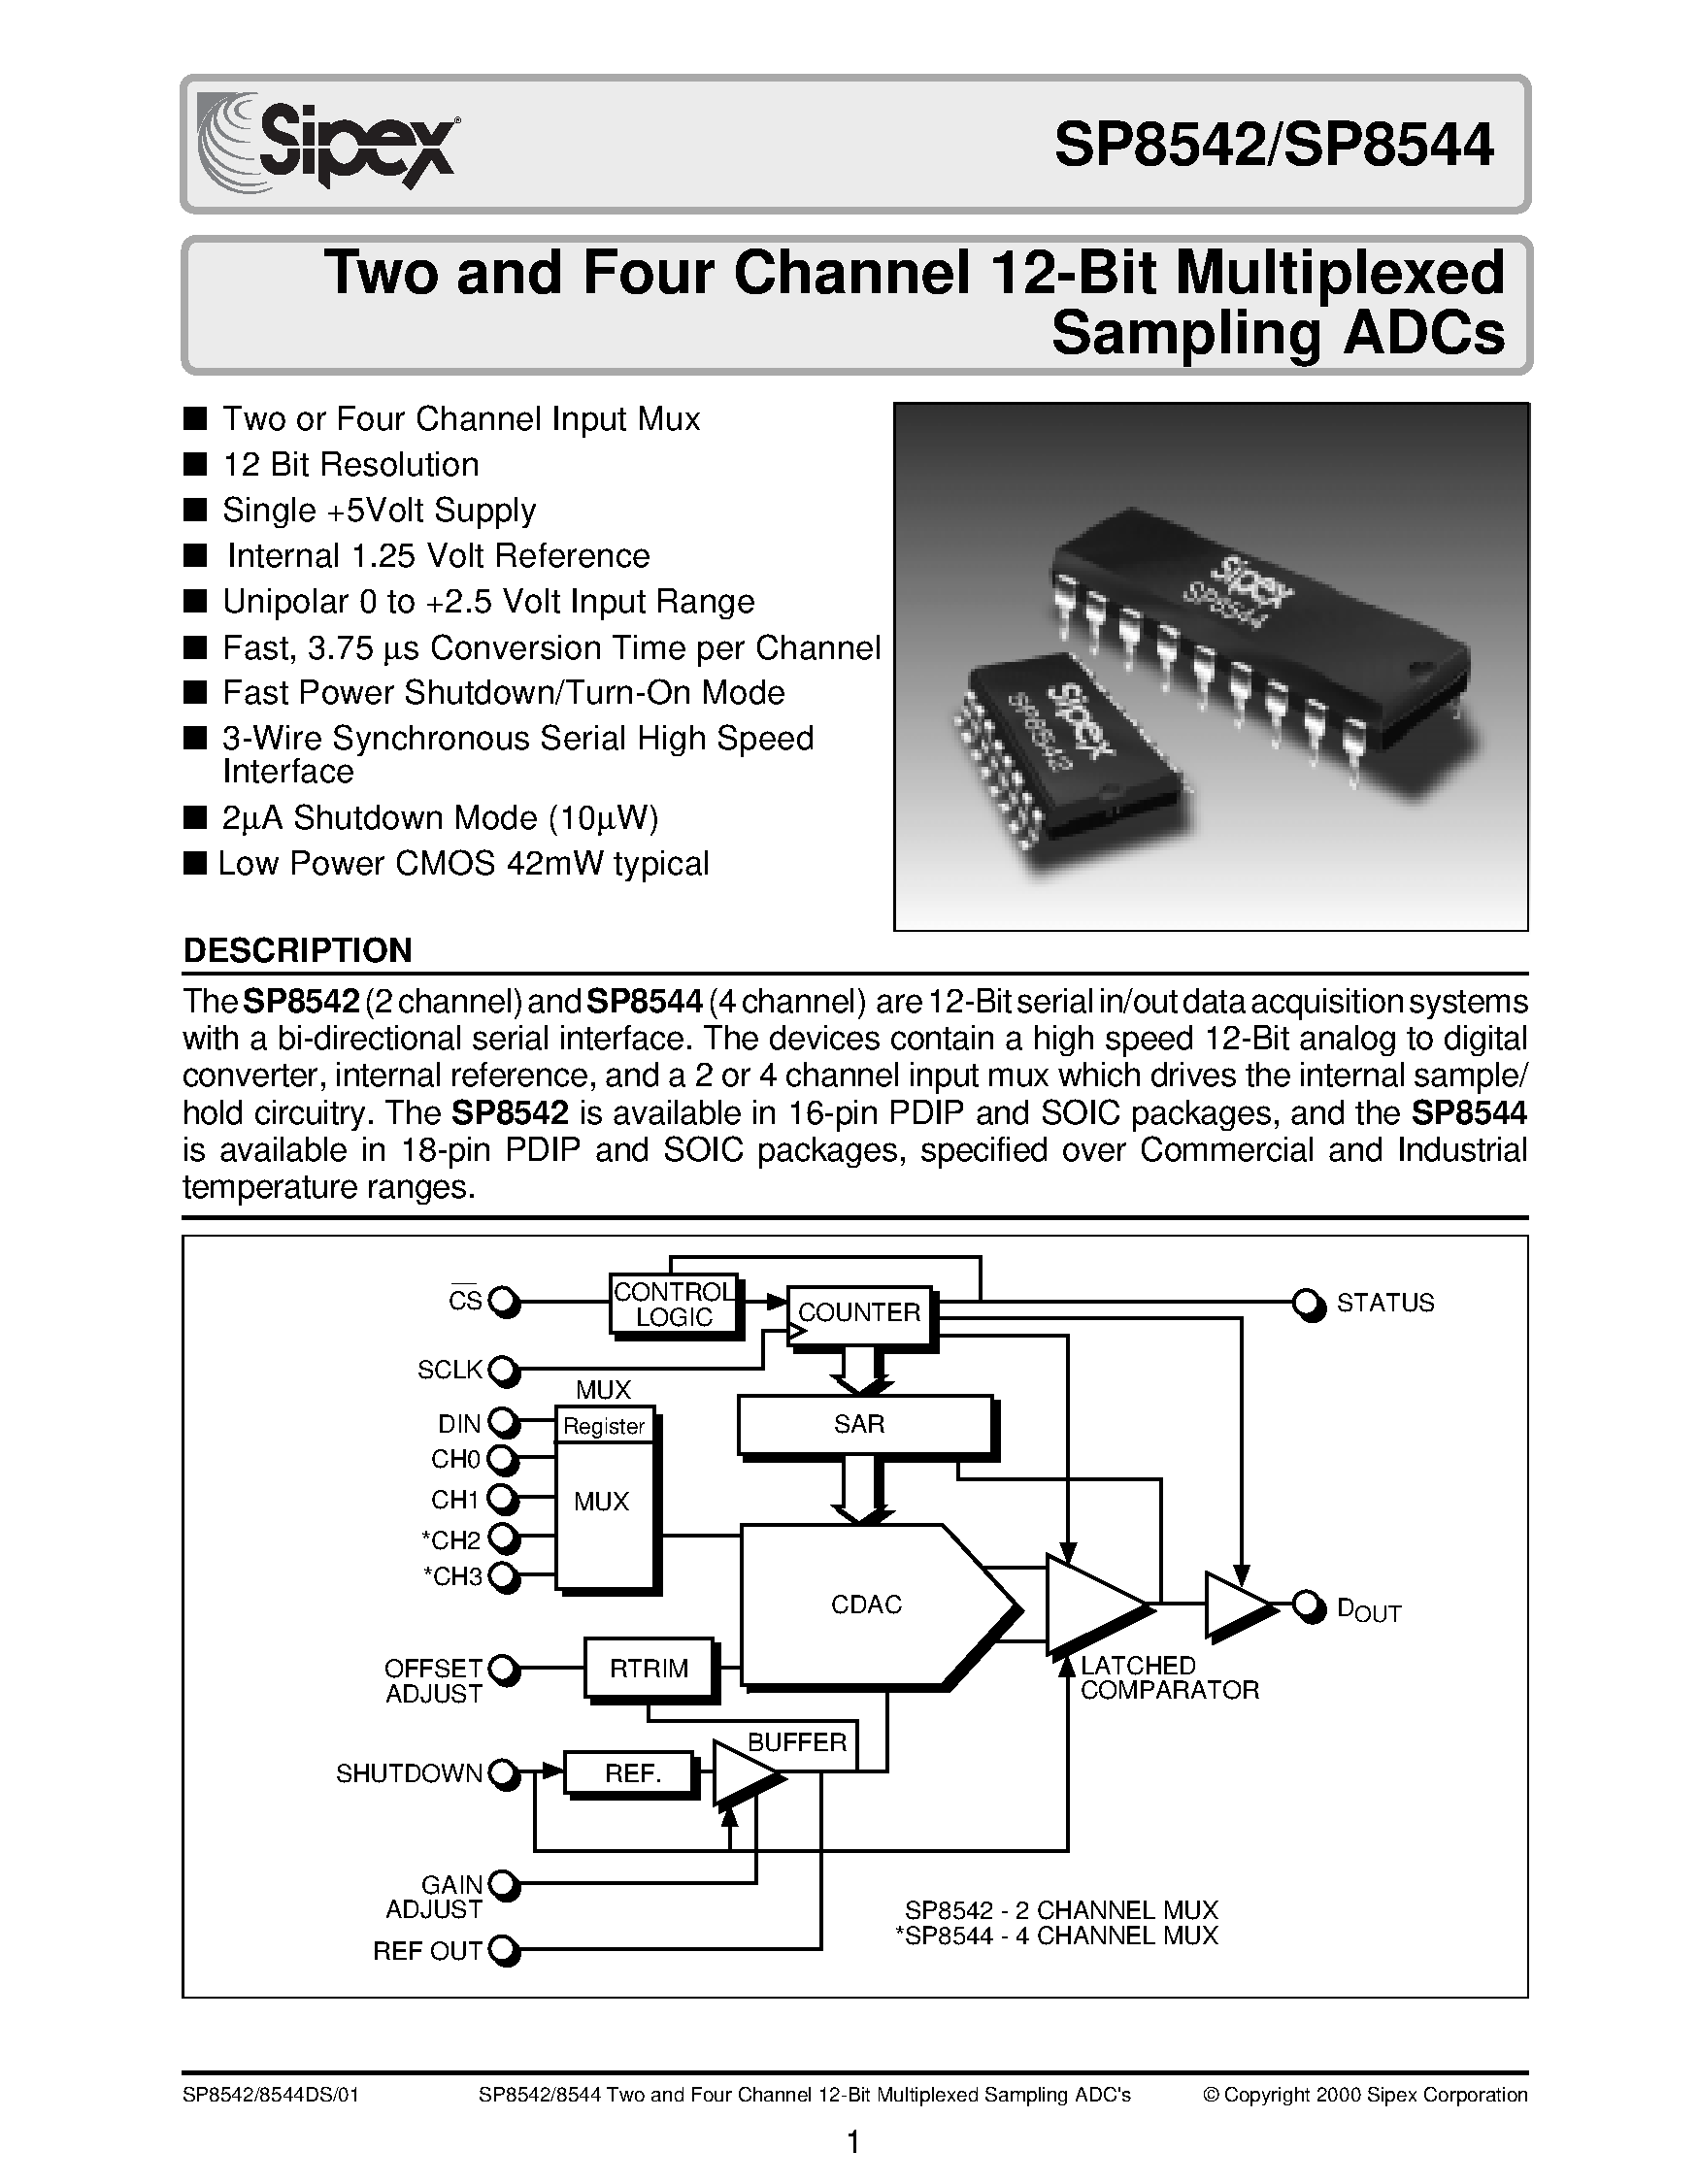 Datasheet SP8542JS - Two and Four Channel 12-Bit Multiplexed Sampling ADCs page 1